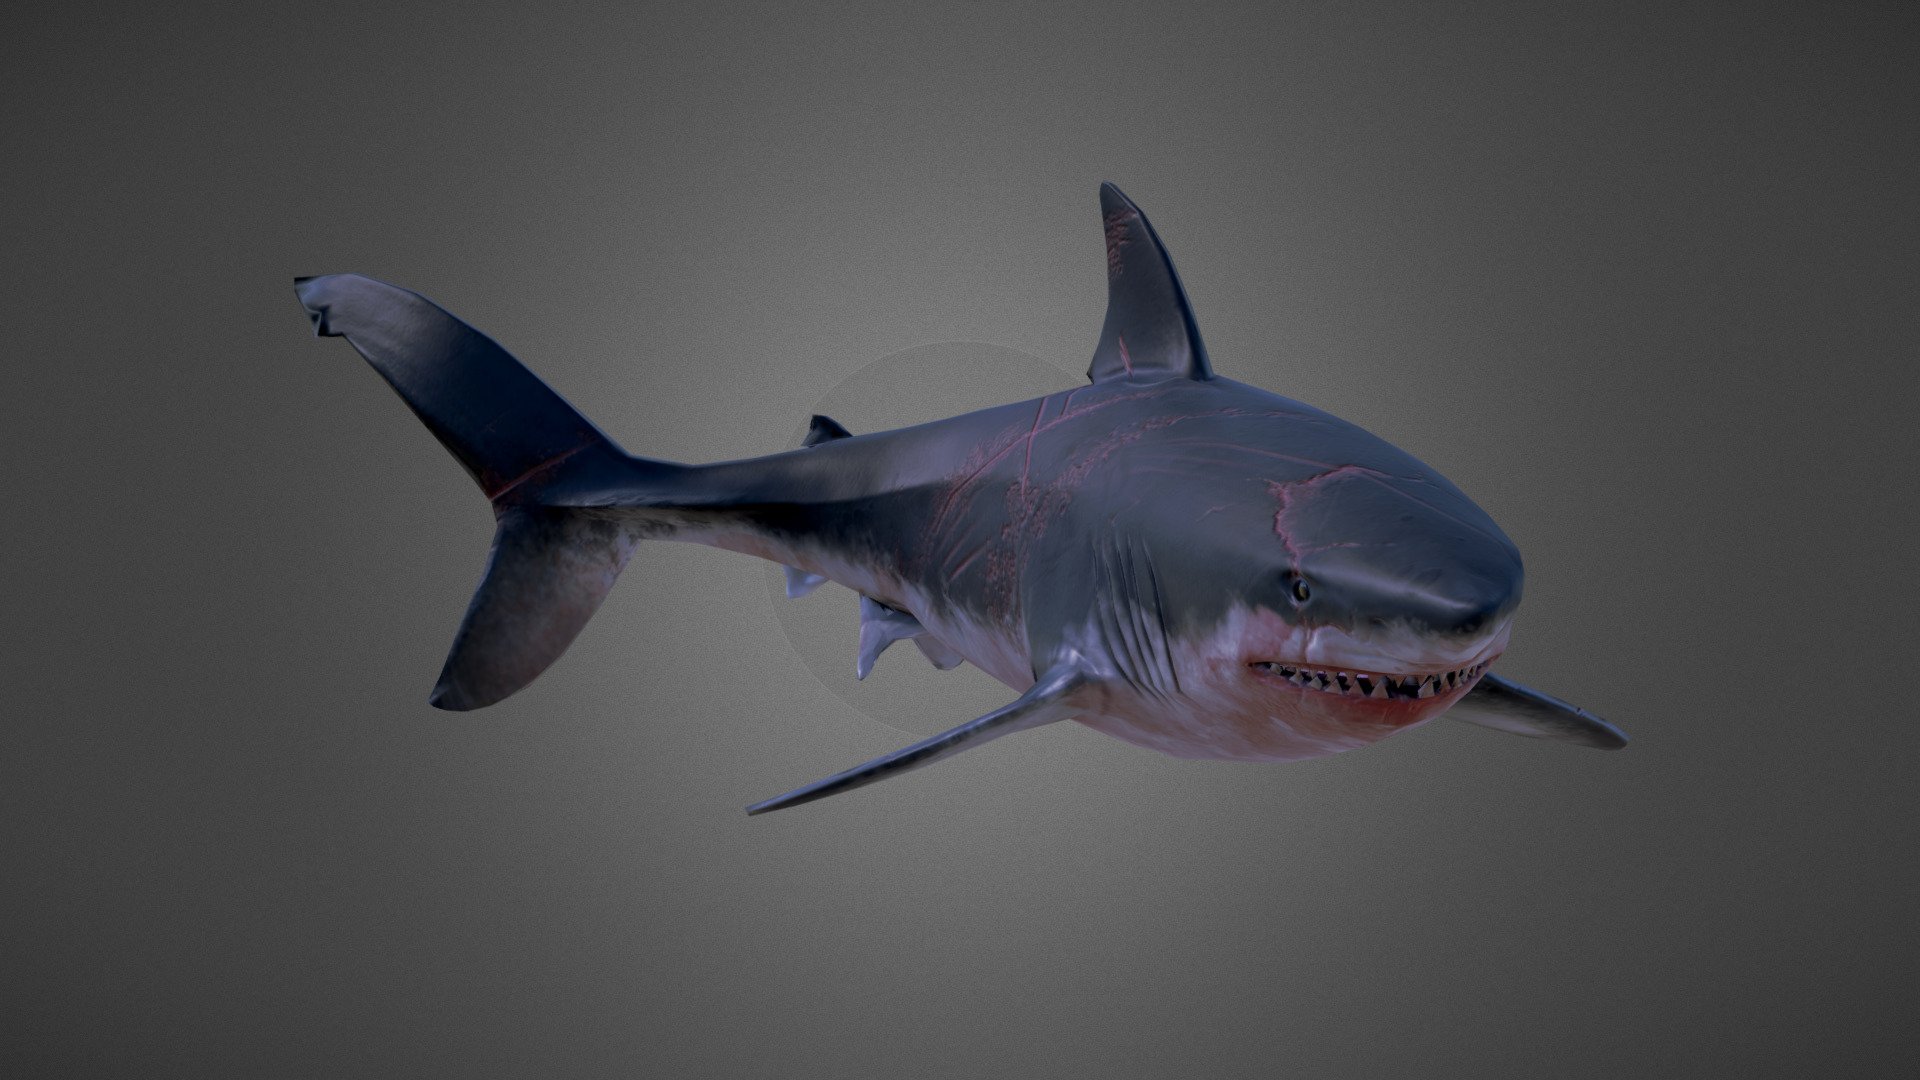 A game-ready shark as part of my graduation project at Information Technology Institue (ITI).
Sculpted in ZBrush, textured inSubstance Painter &amp; rigged in Maya.
The shark is one of the enemies in Blue Age a post-apocalyptic survival game, in world submerged under water.
For more Blue Age related art please check the talented artist Sarah's work:
https://sketchfab.com/Sarah.El.Sergany
Animated in Maya by: Aya ElSergany 3d model